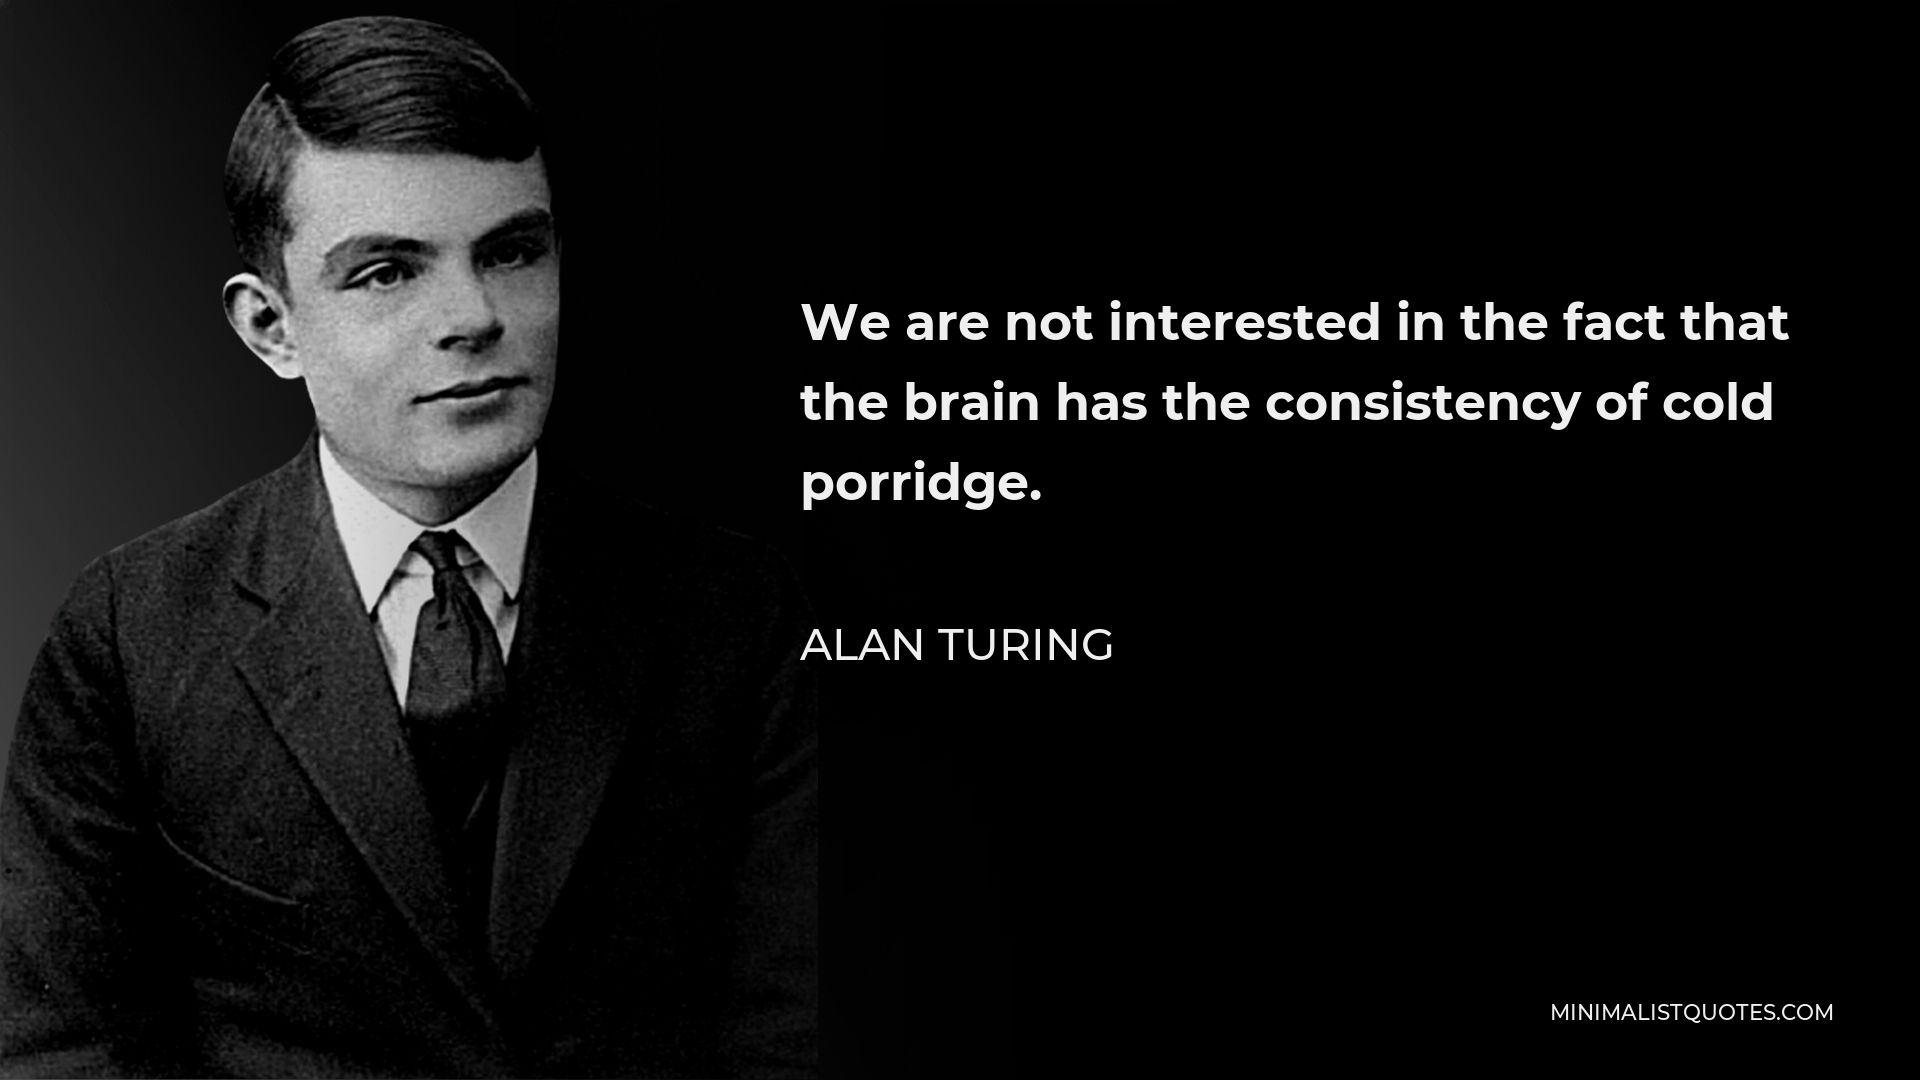 Alan Turing Quote - We are not interested in the fact that the brain has the consistency of cold porridge.